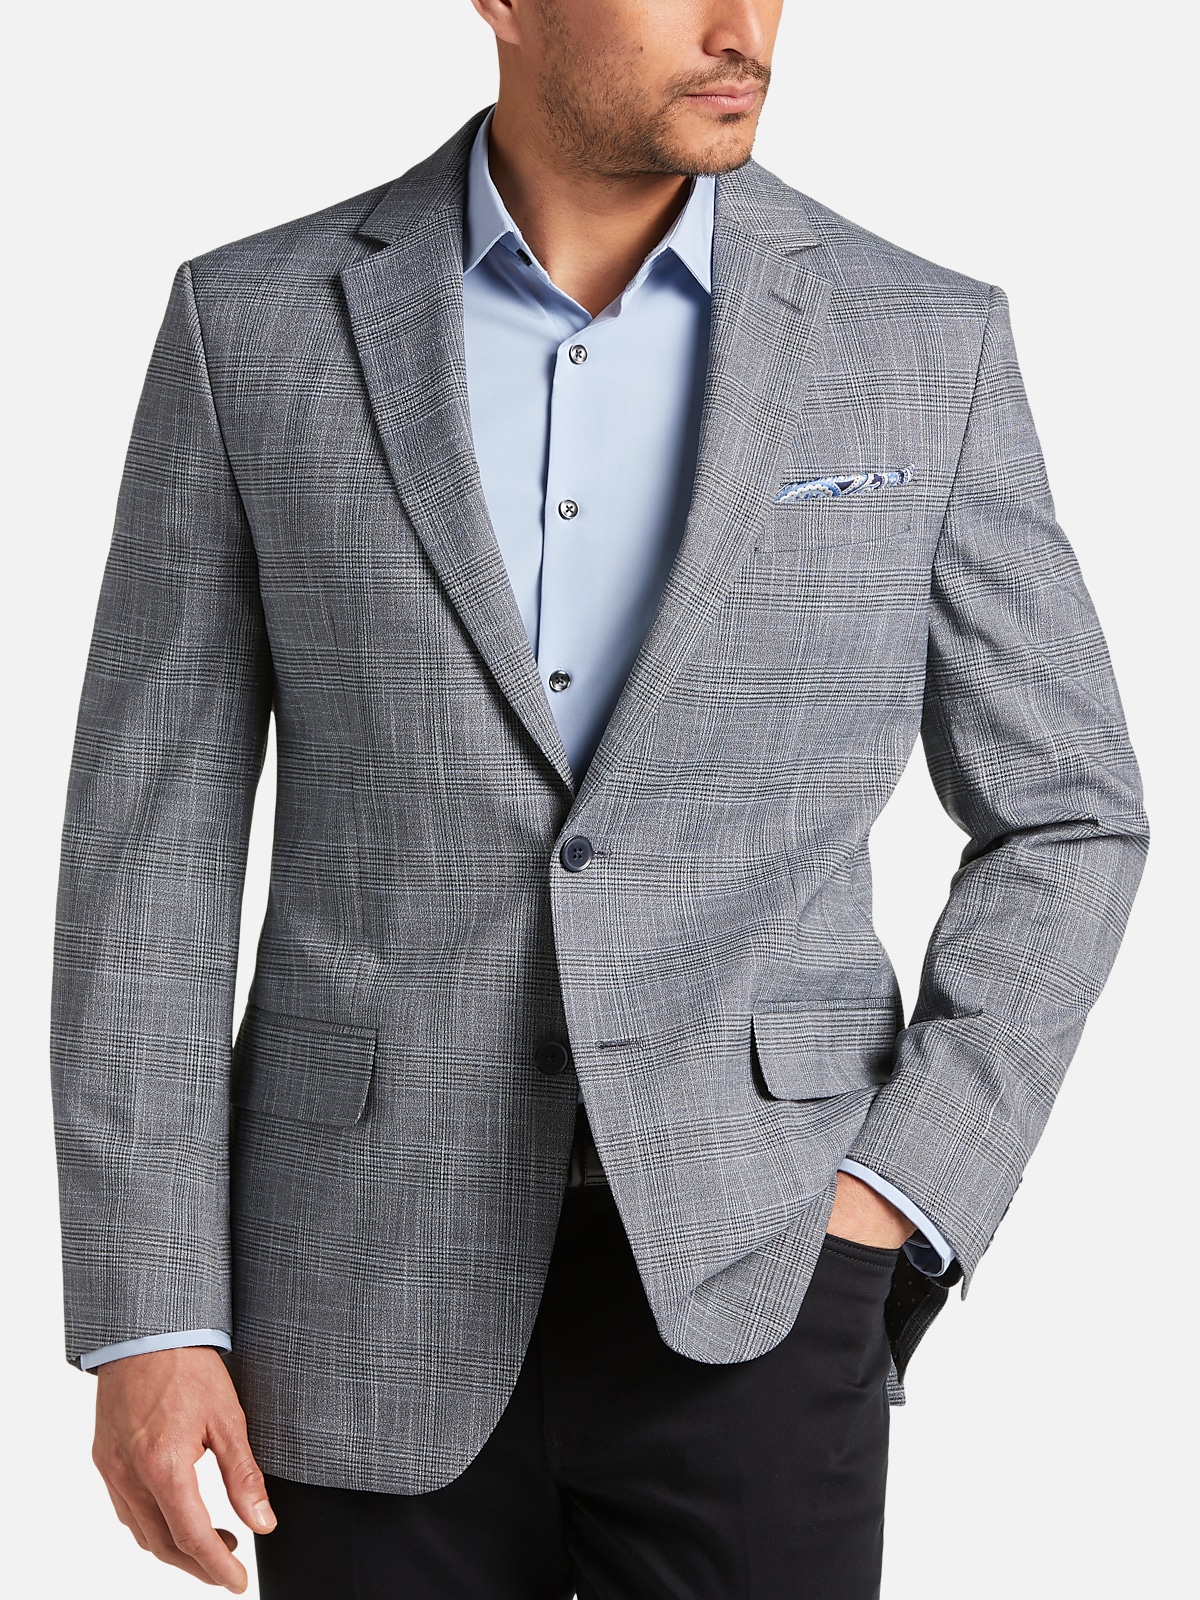 Michael Strahan Classic Fit Sport Coat | All Clearance $39.99| Men's ...